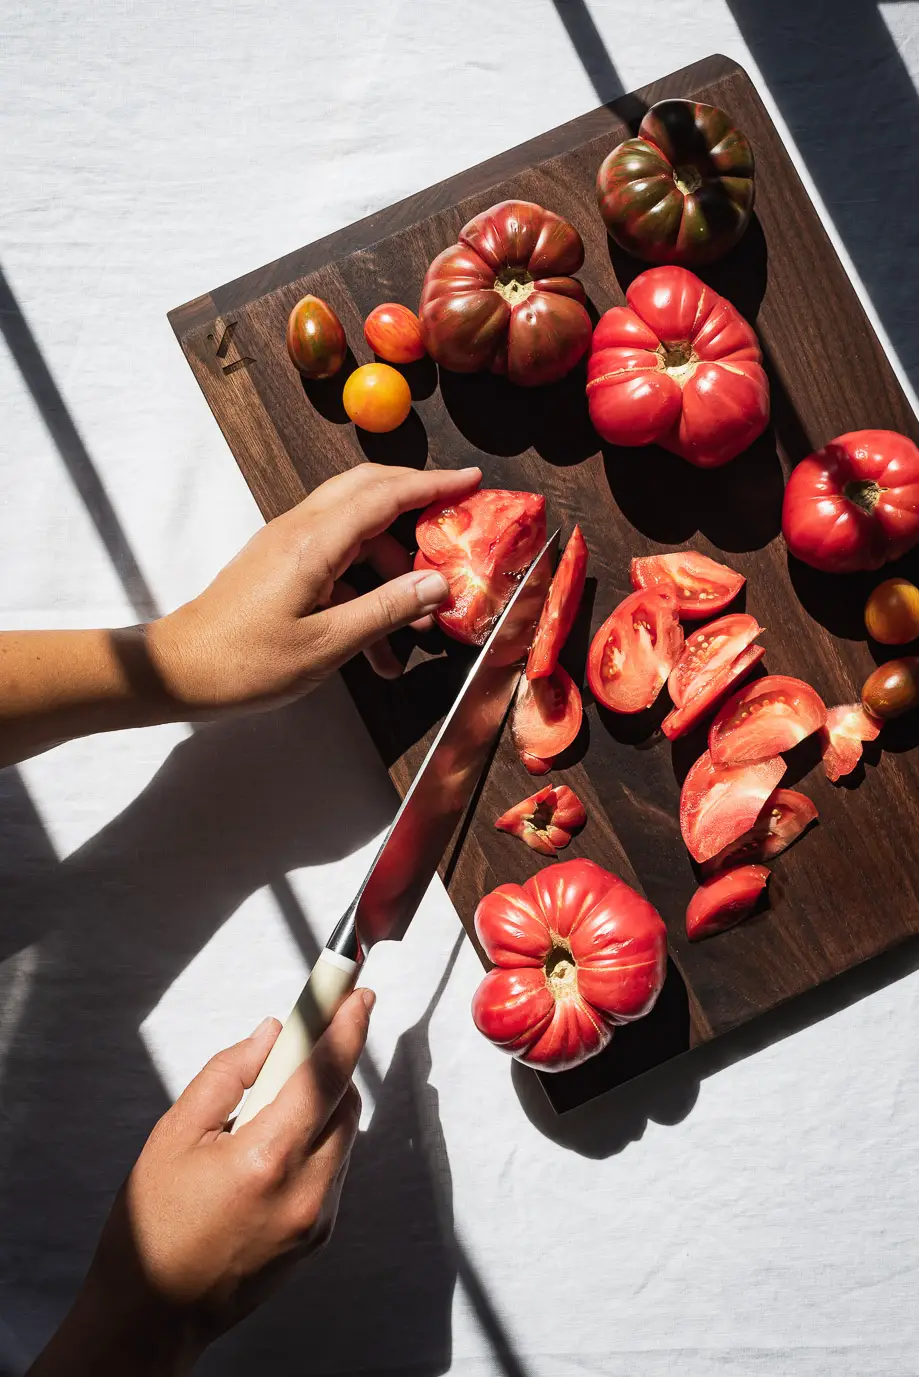 heirloom tomatoes on Material Kitchen angled board